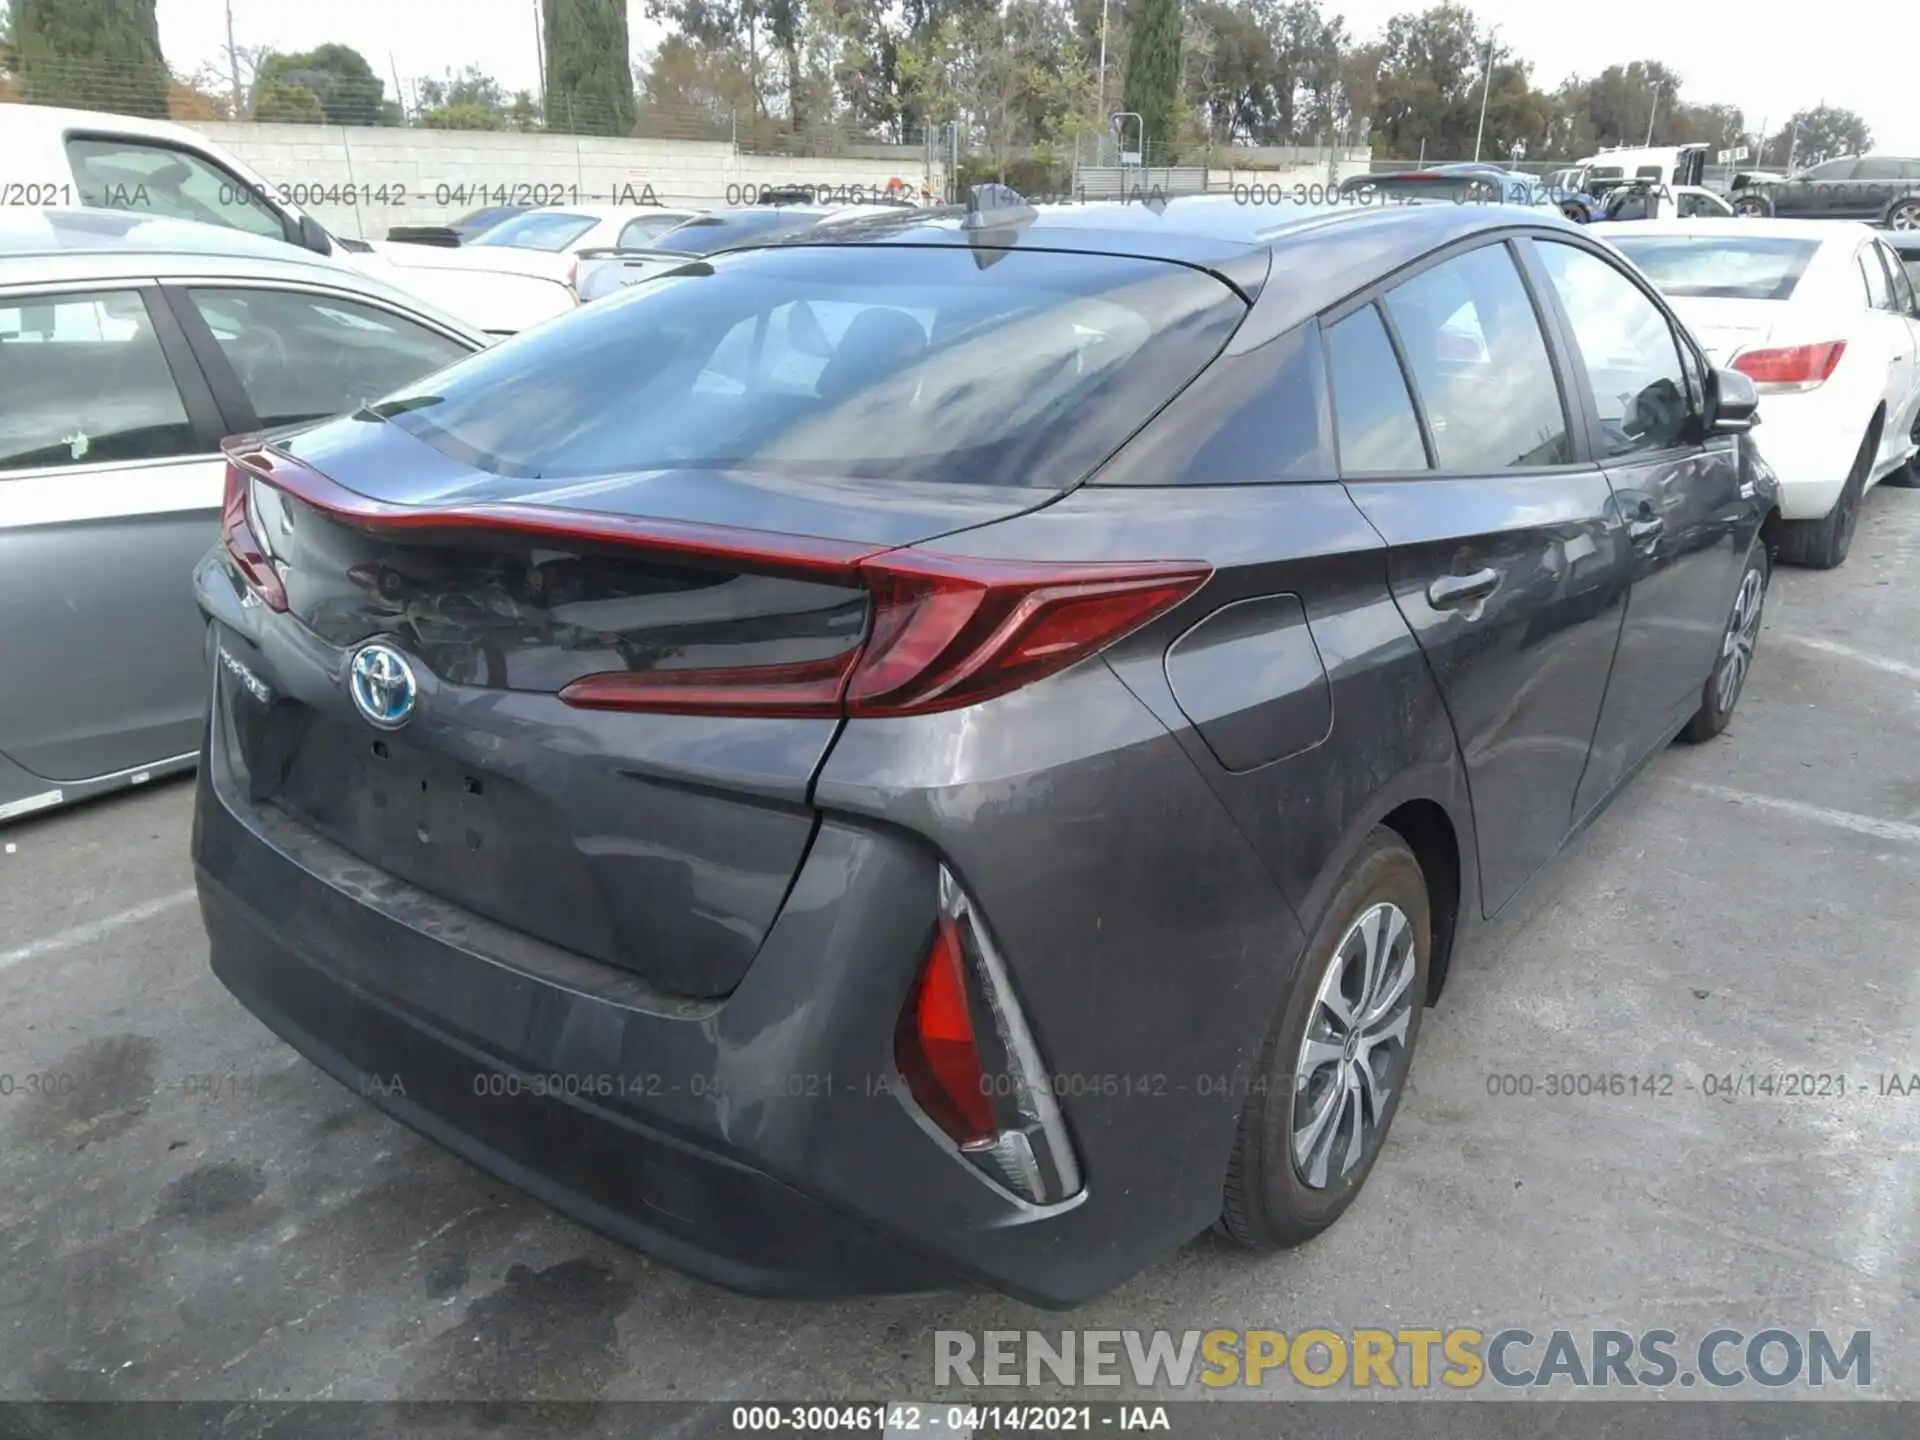 4 Photograph of a damaged car JTDKAMFPXM3169674 TOYOTA PRIUS PRIME 2021